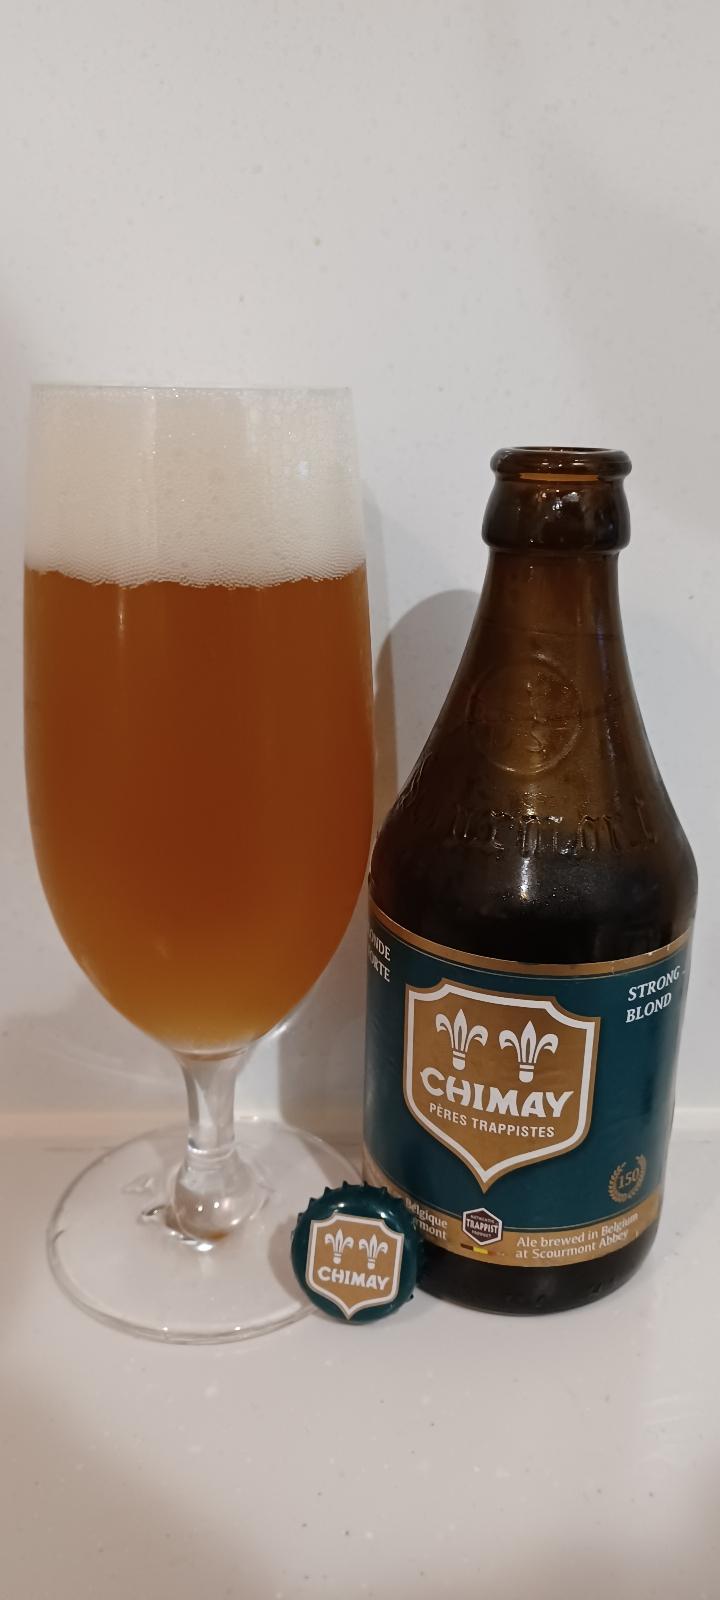 Chimay Pères Trappistes Green